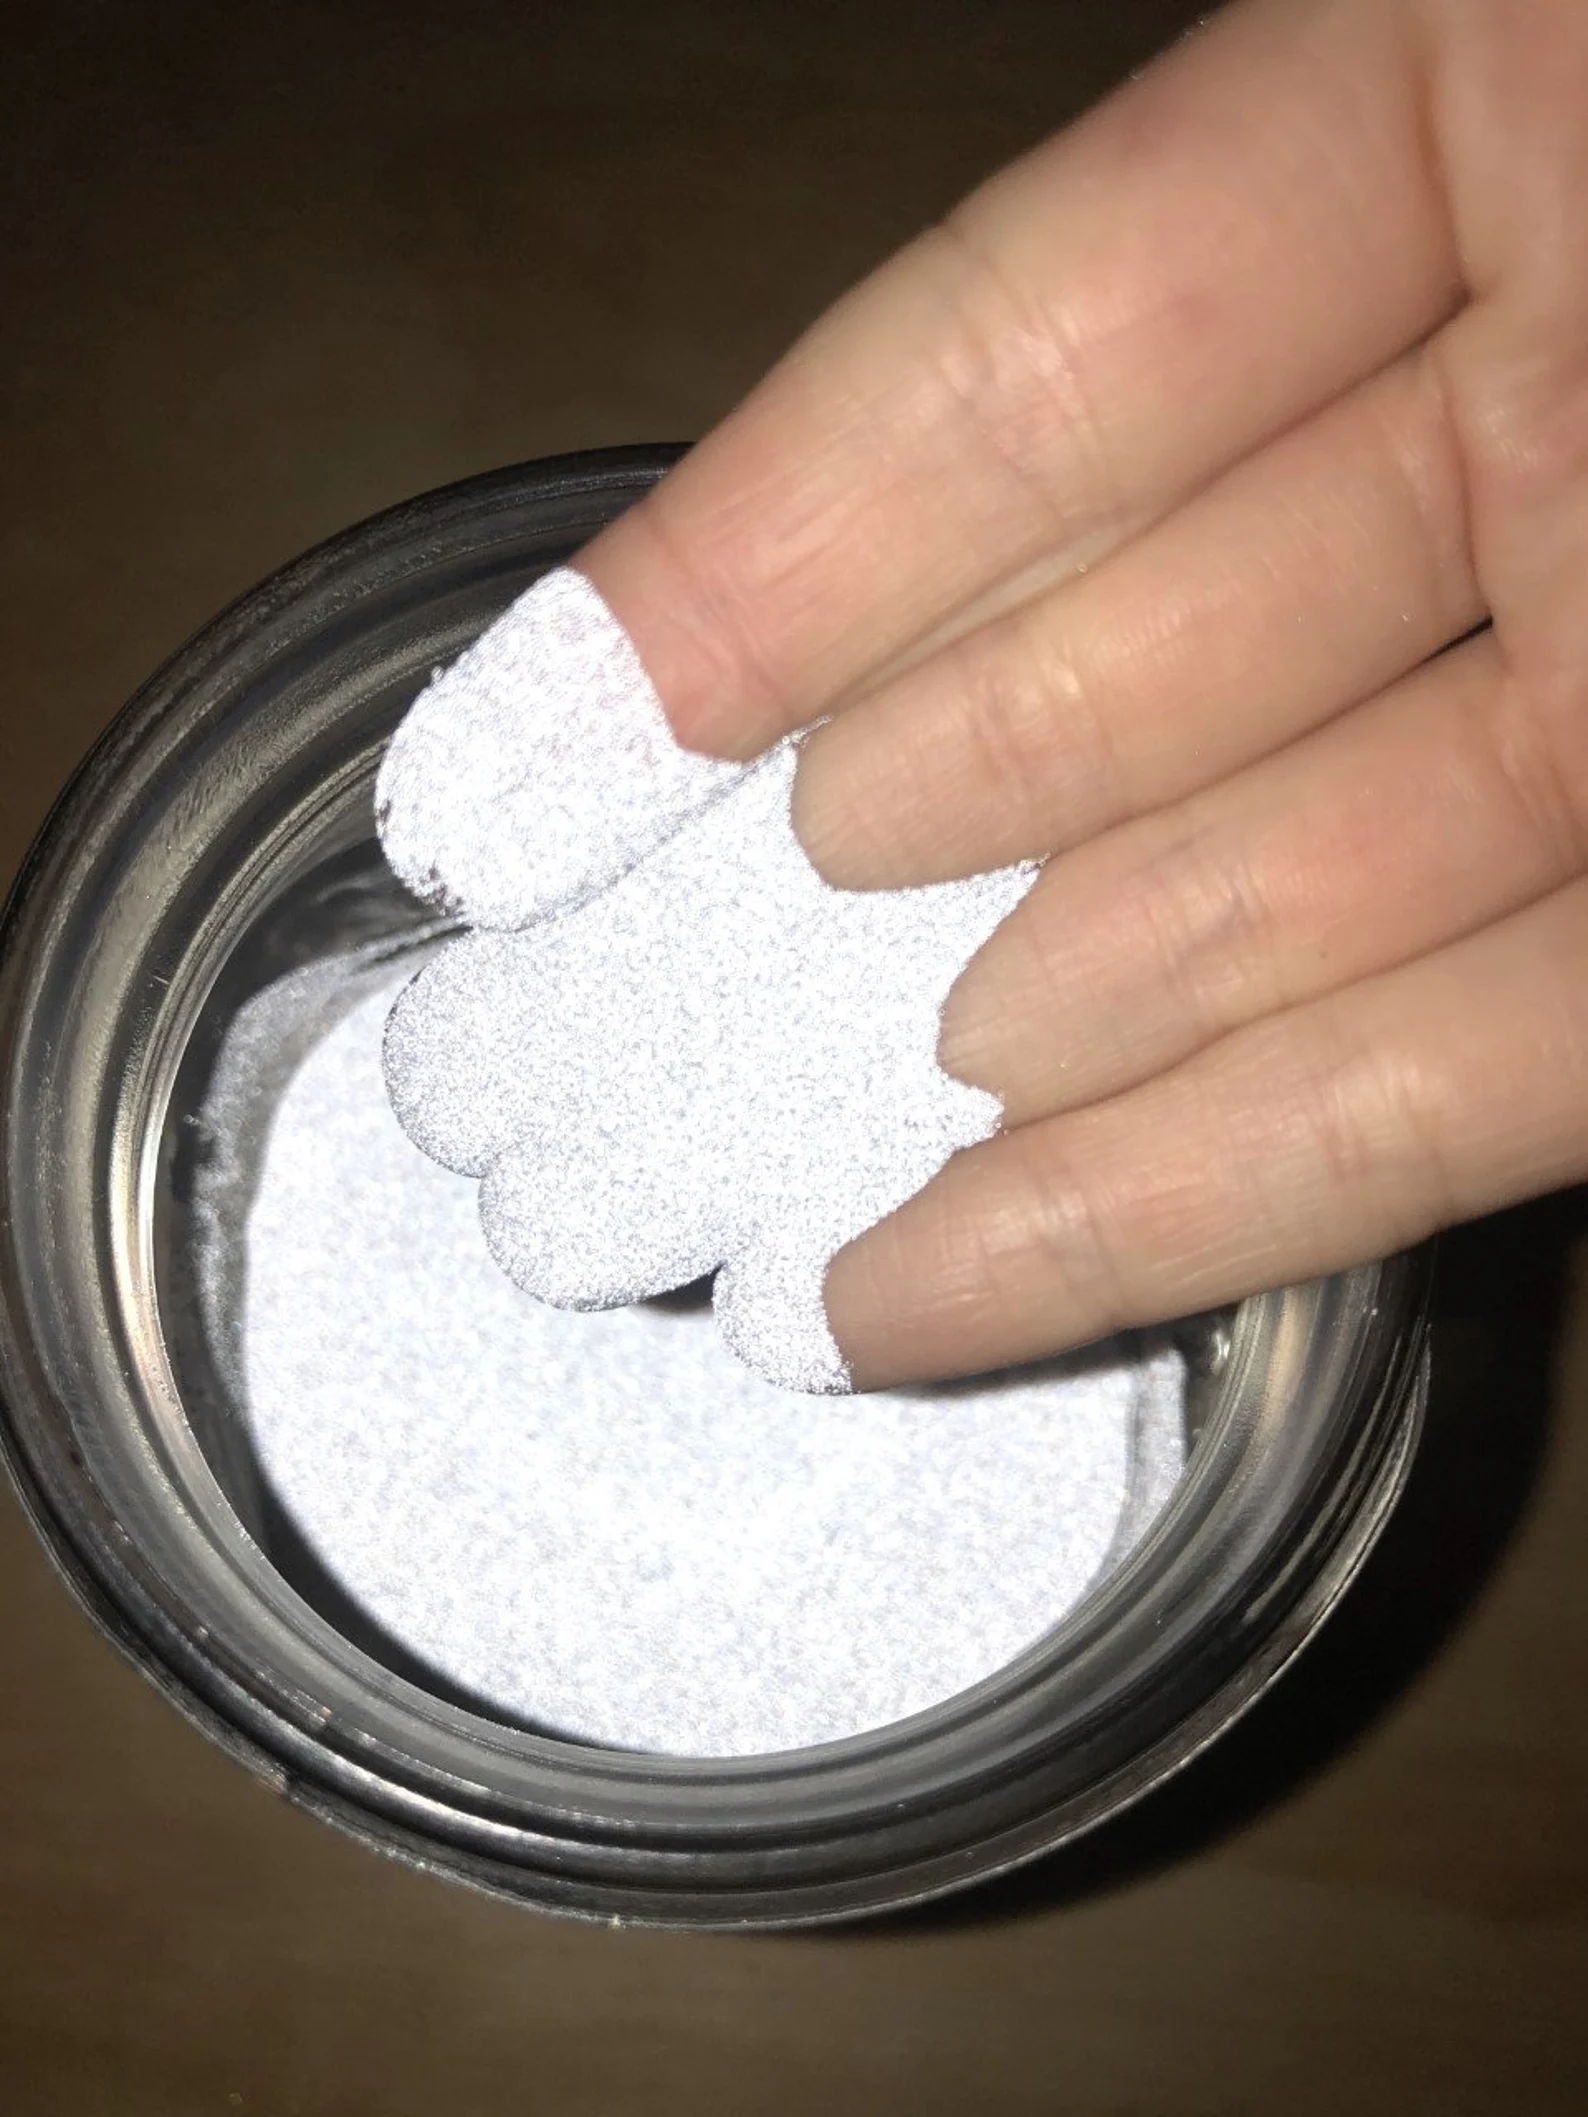 When is Retro Reflective Paint Better Than Sprinkle on Reflective Powder?